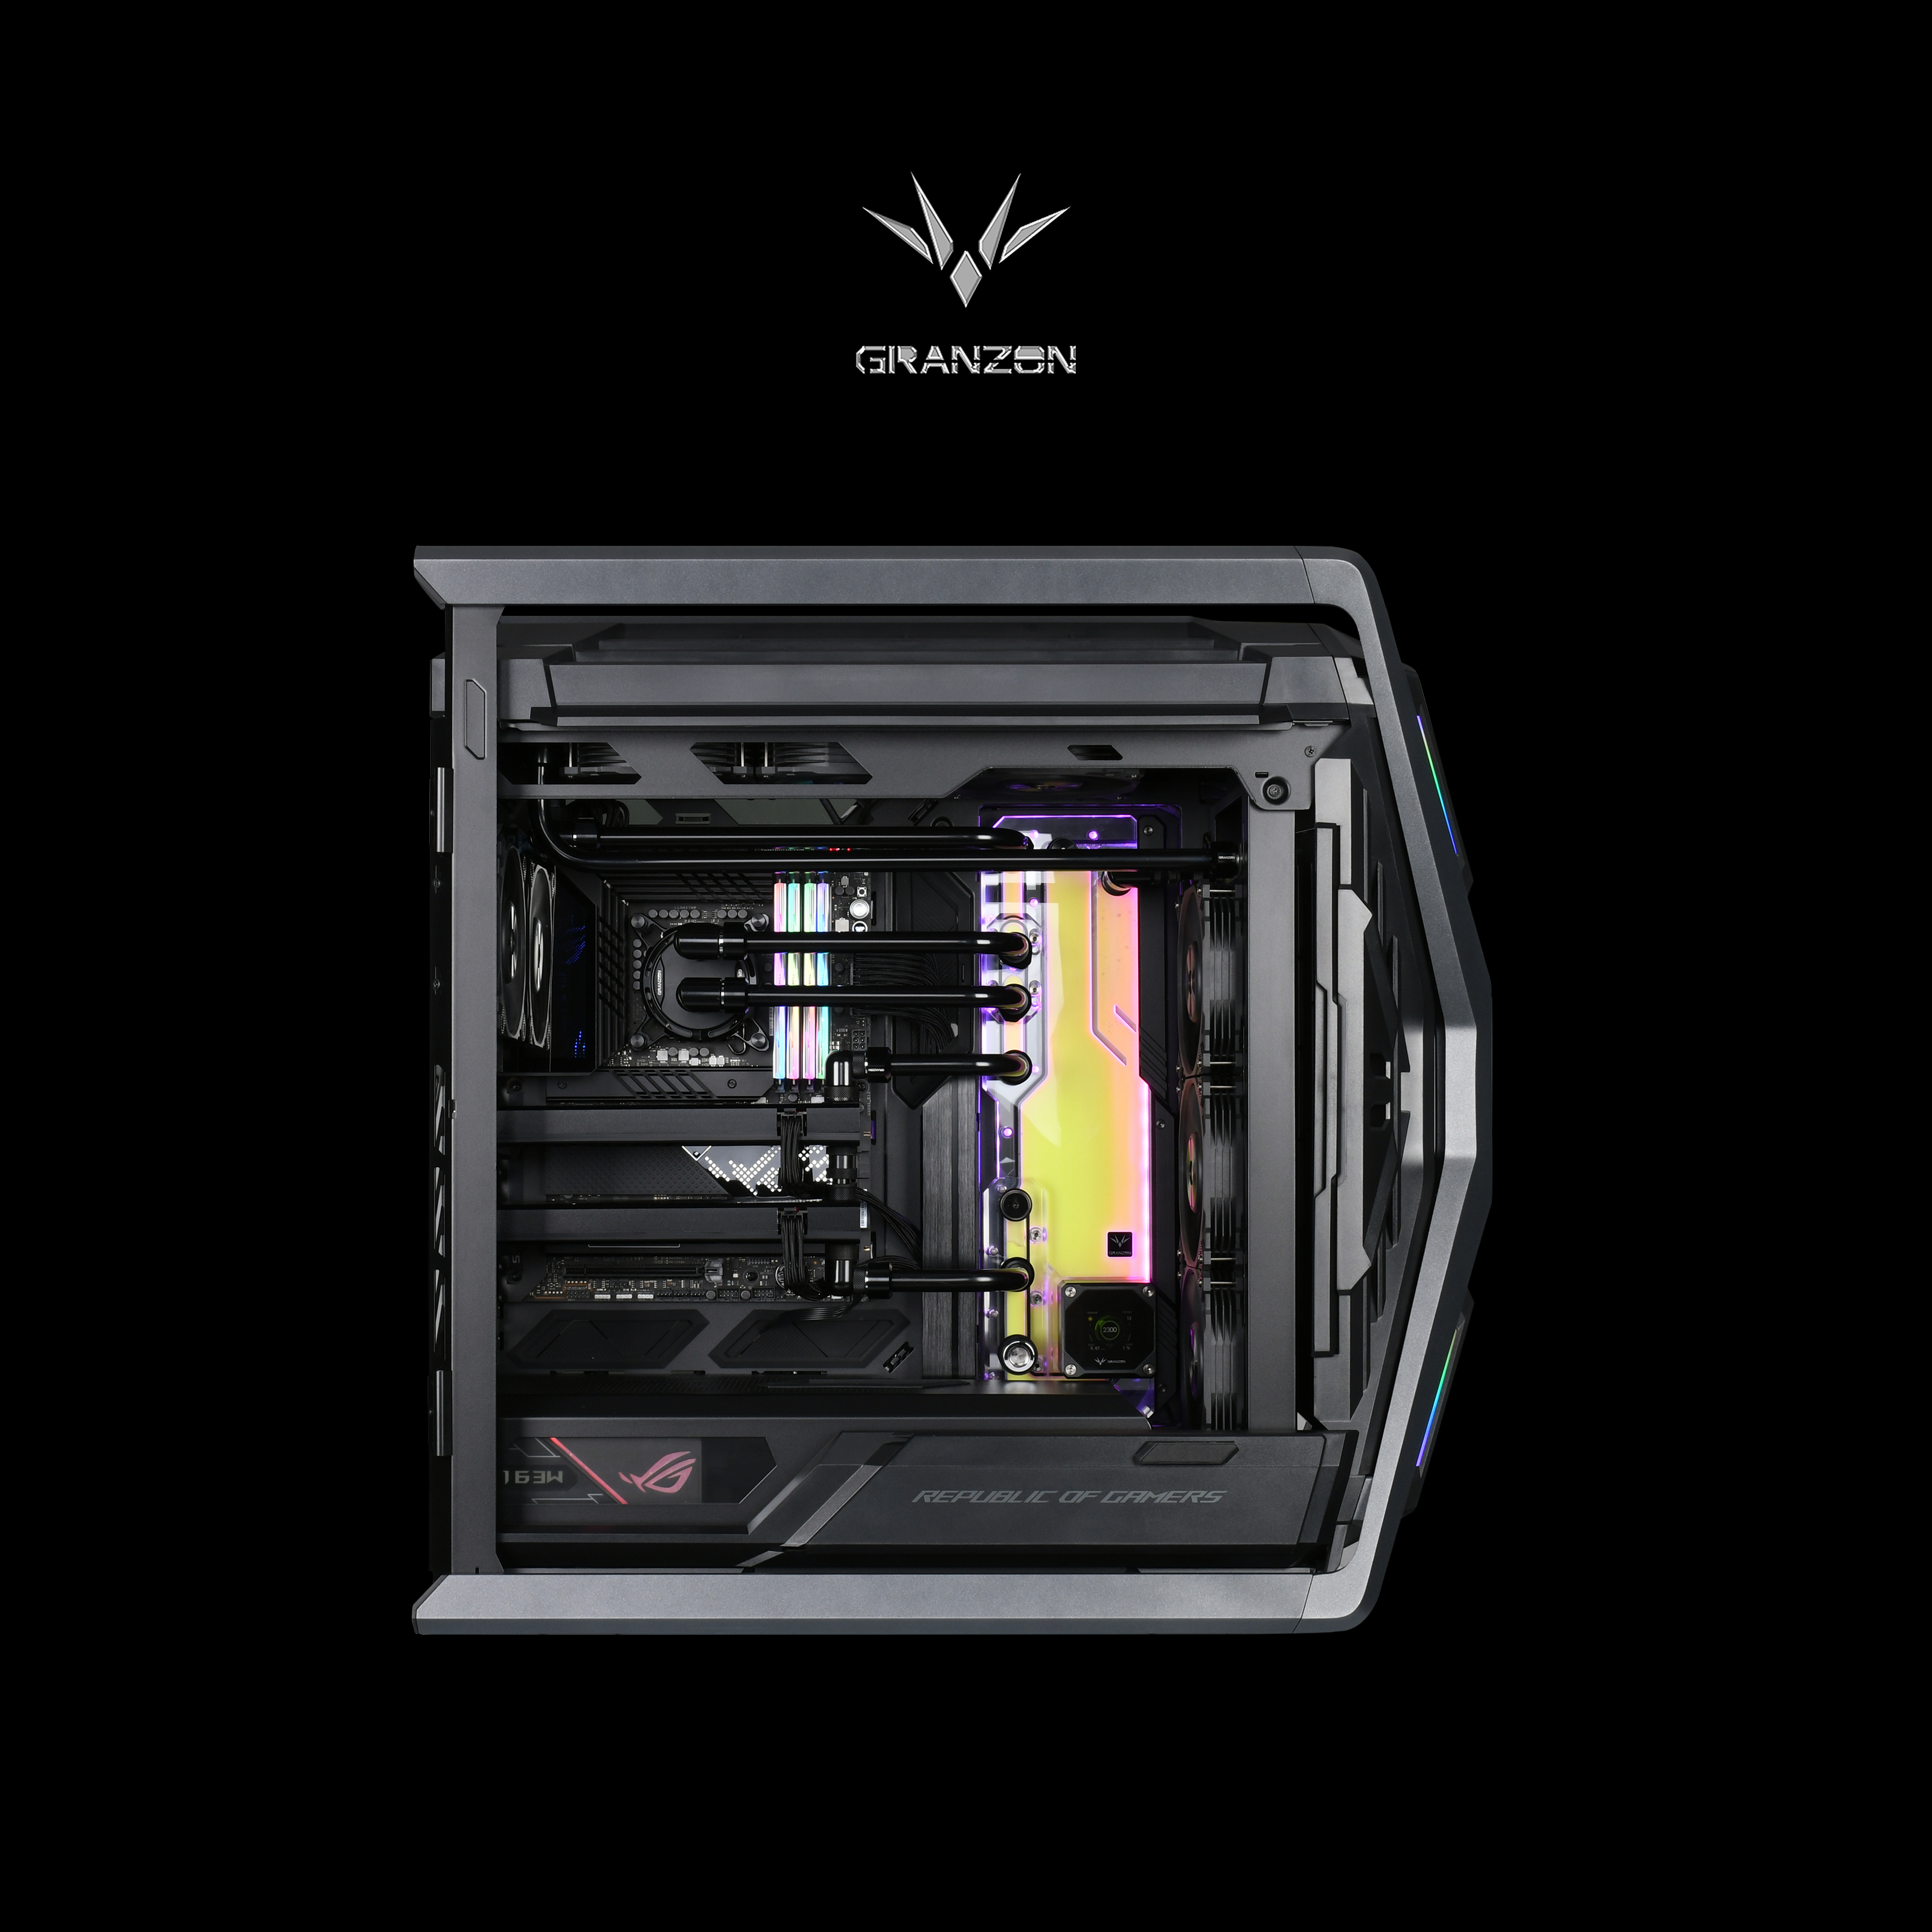 https://images.51microshop.com/860/product/20230425/Granzon_Advanced_Distro_Plate_Kit_For_Asus_ROG_Hyperion_GR701_Case_5V_A_RGB_Complete_Loop_For_Single_GPU_PC_Building_Water_Cooling_Waterway_Board_GC_AS_GR701_1682413794216_4.jpg